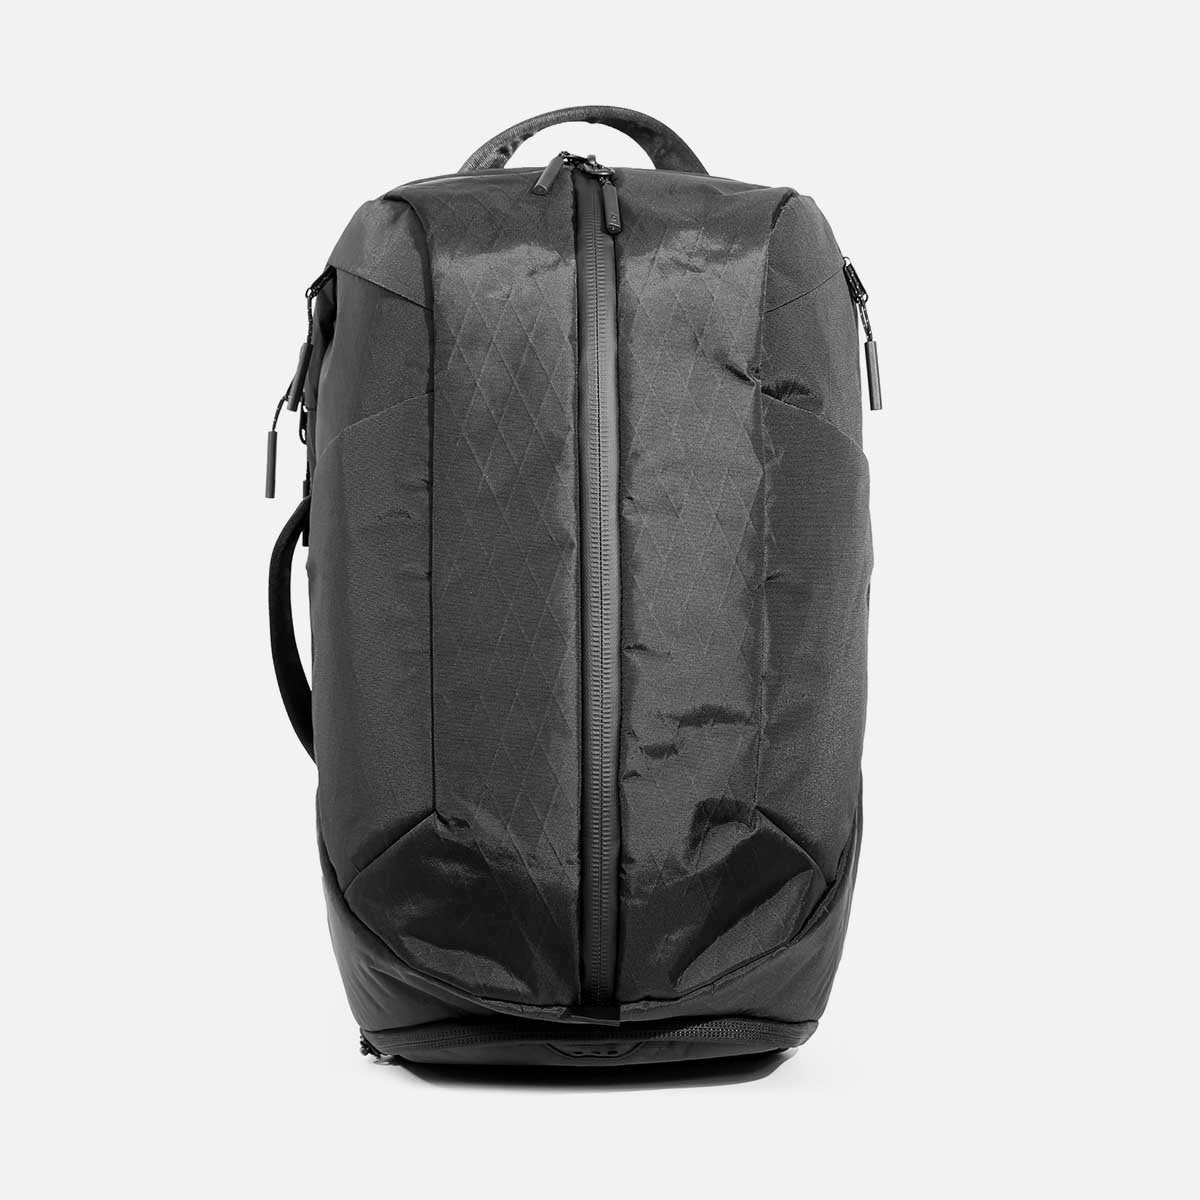 Aer Duffel Pack 3 (X-Pac) laptop backpacks for travel – Mined